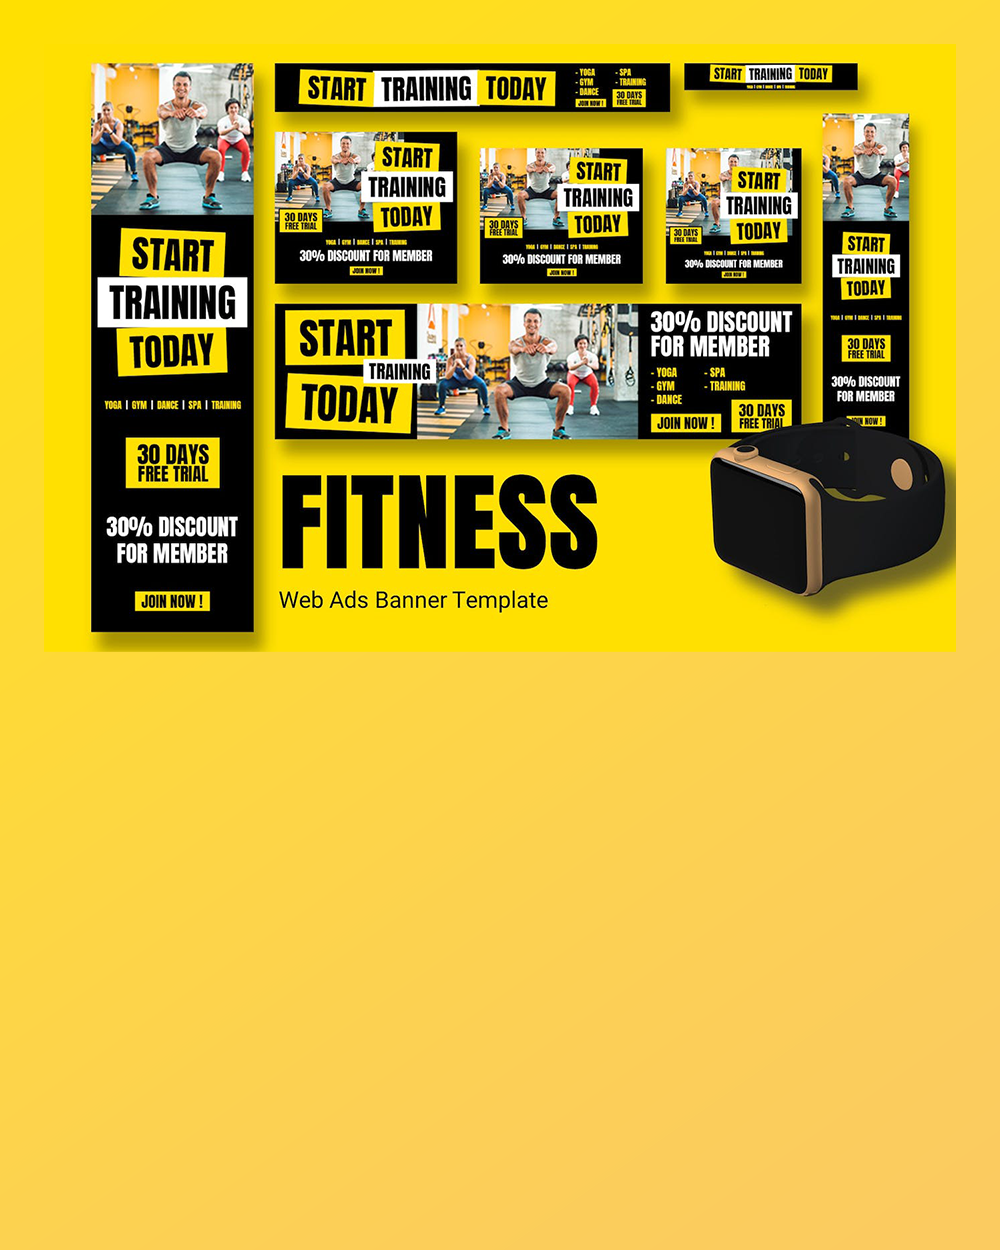 Fitness Web Ads Banners gradient